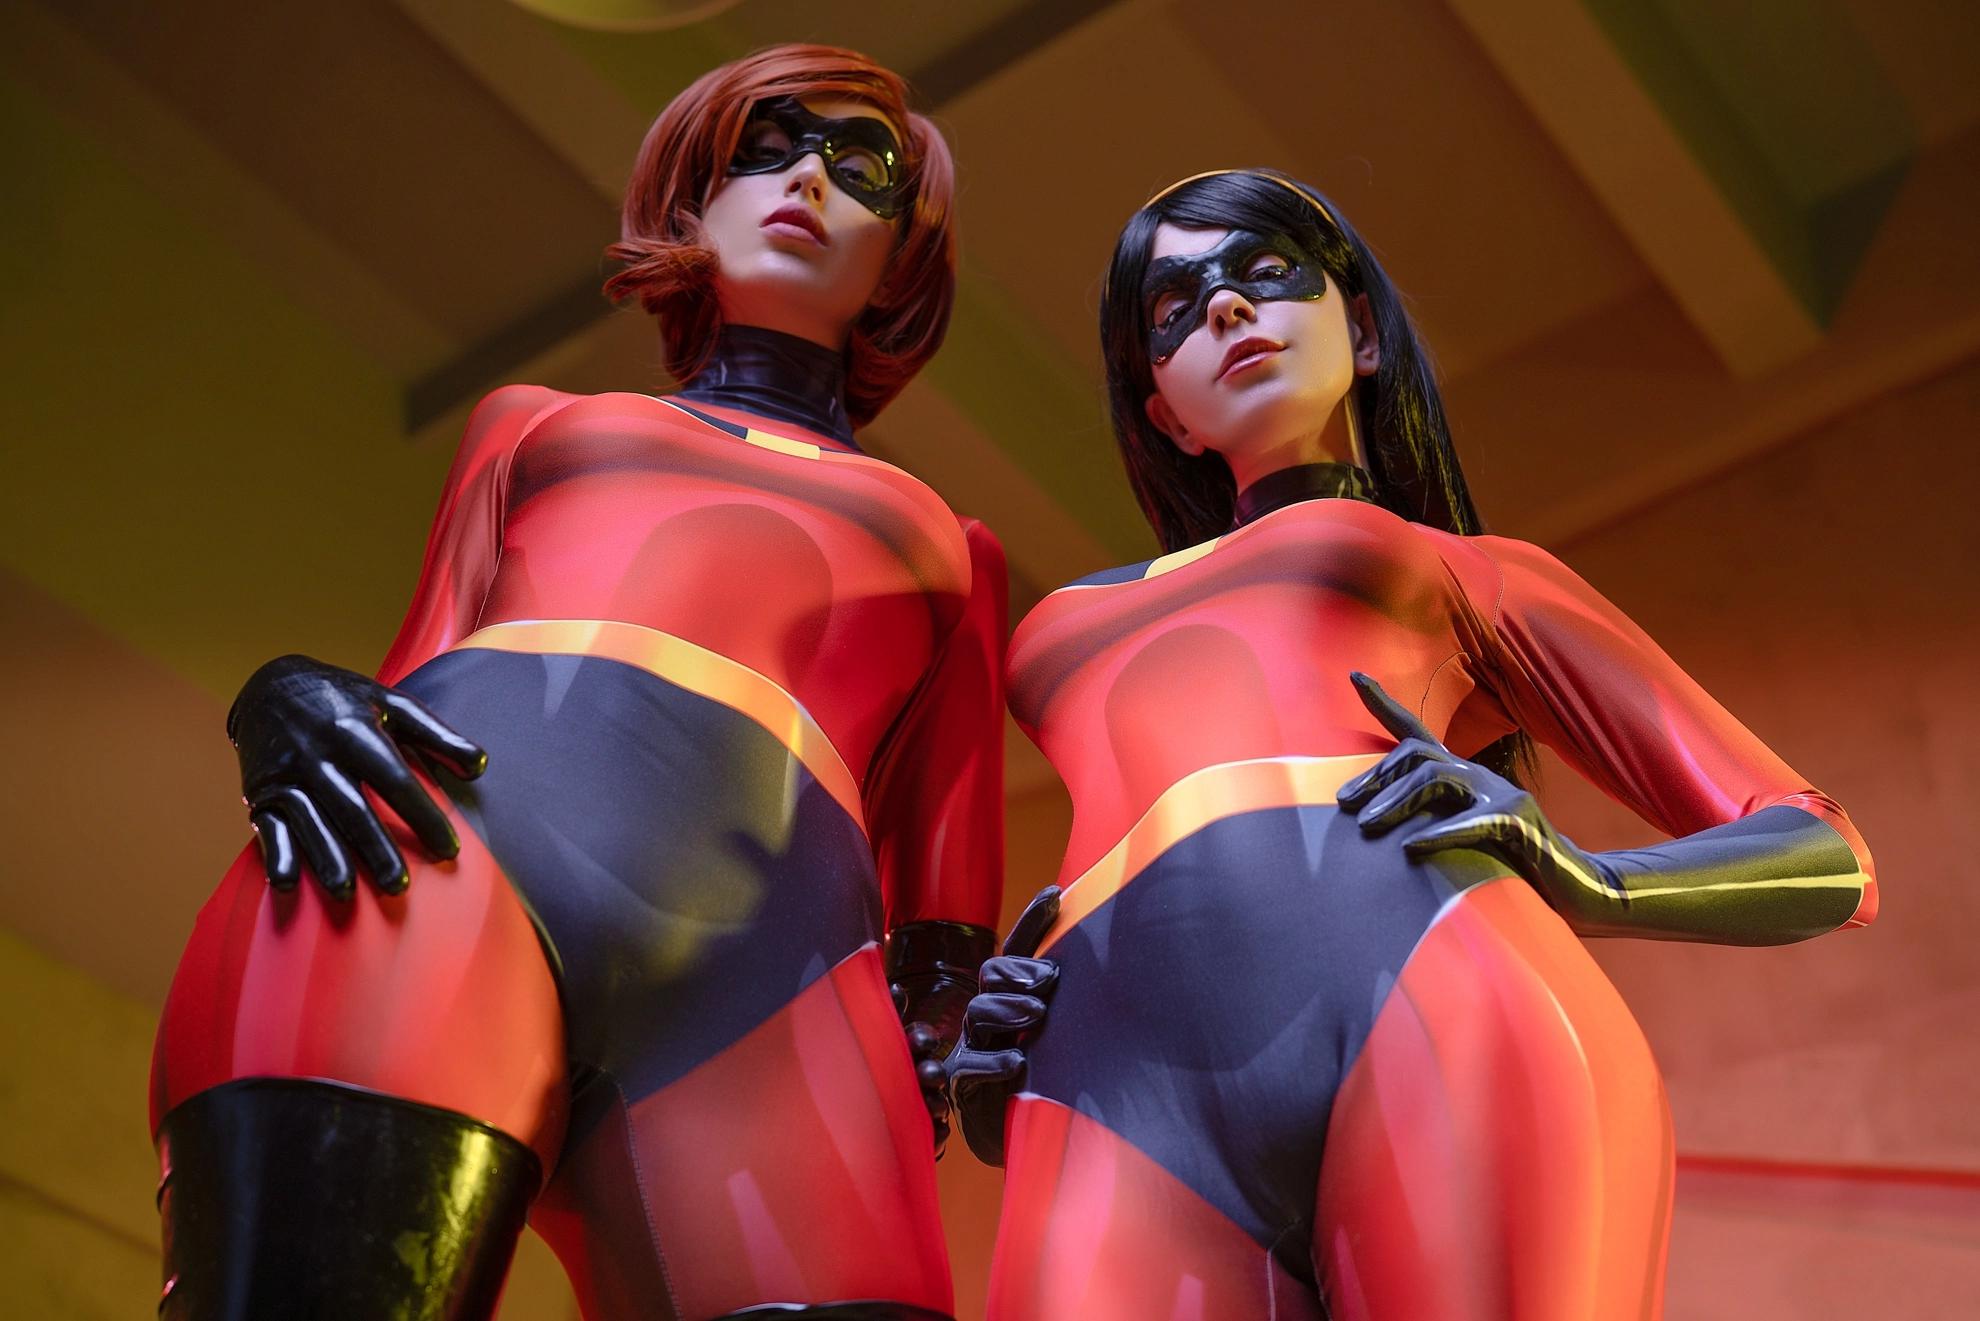 The Incredibles Cosplay Porn - Incredibles' cosplay by Caterpillarcos and LeraHimera